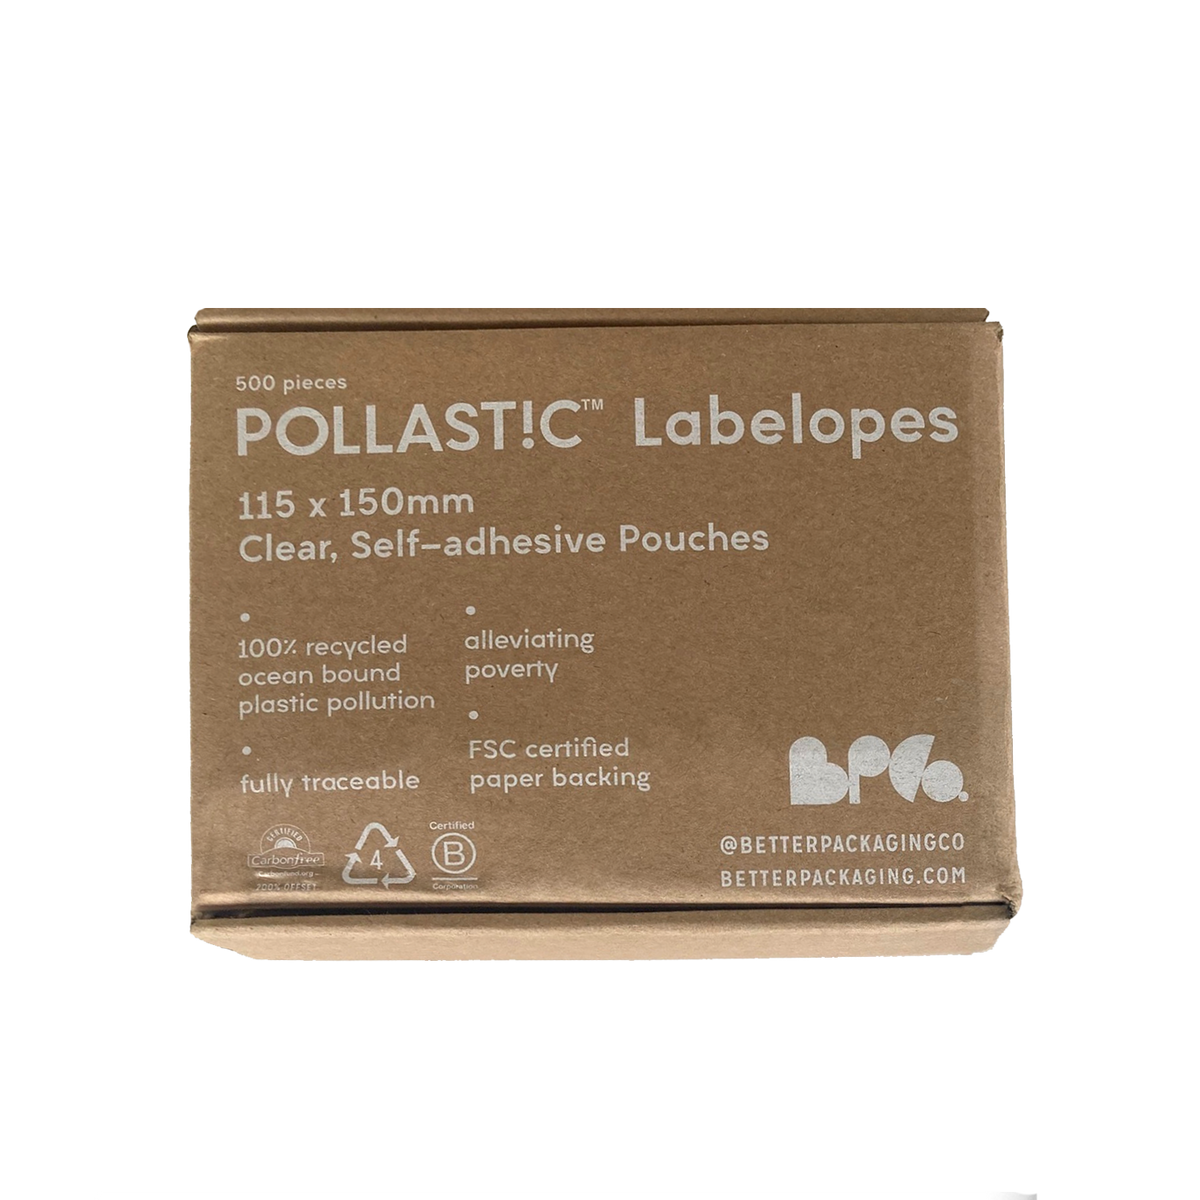 Cardboard box containing Better Packaging POLLAST!C labelopes